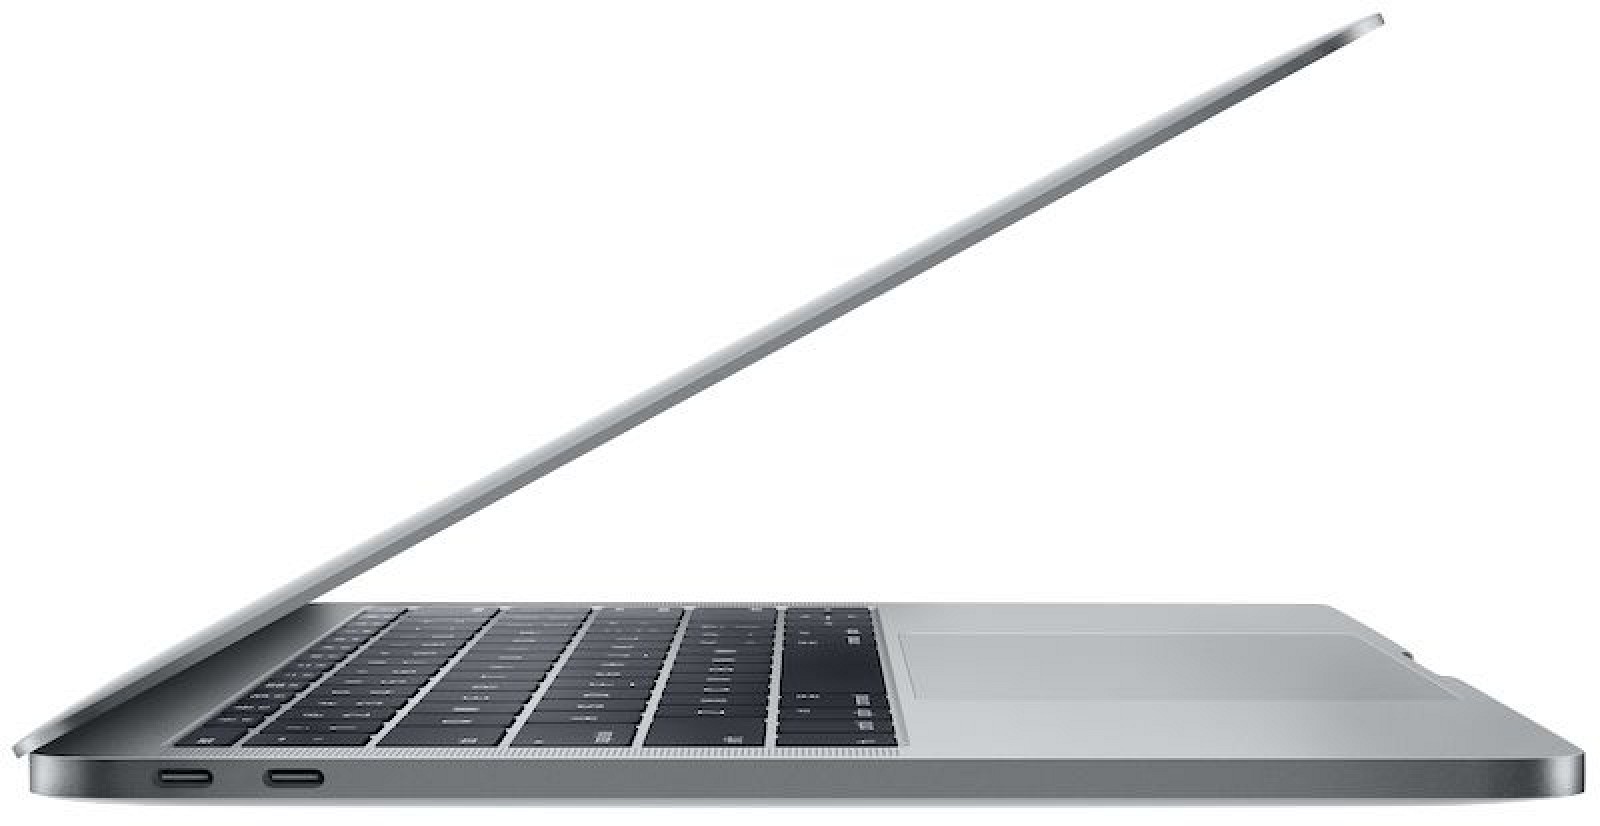 Top Stories: Unreleased MacBook Pro, Improved Keyboard Design for Future Notebooks, FaceTime Attention Correction